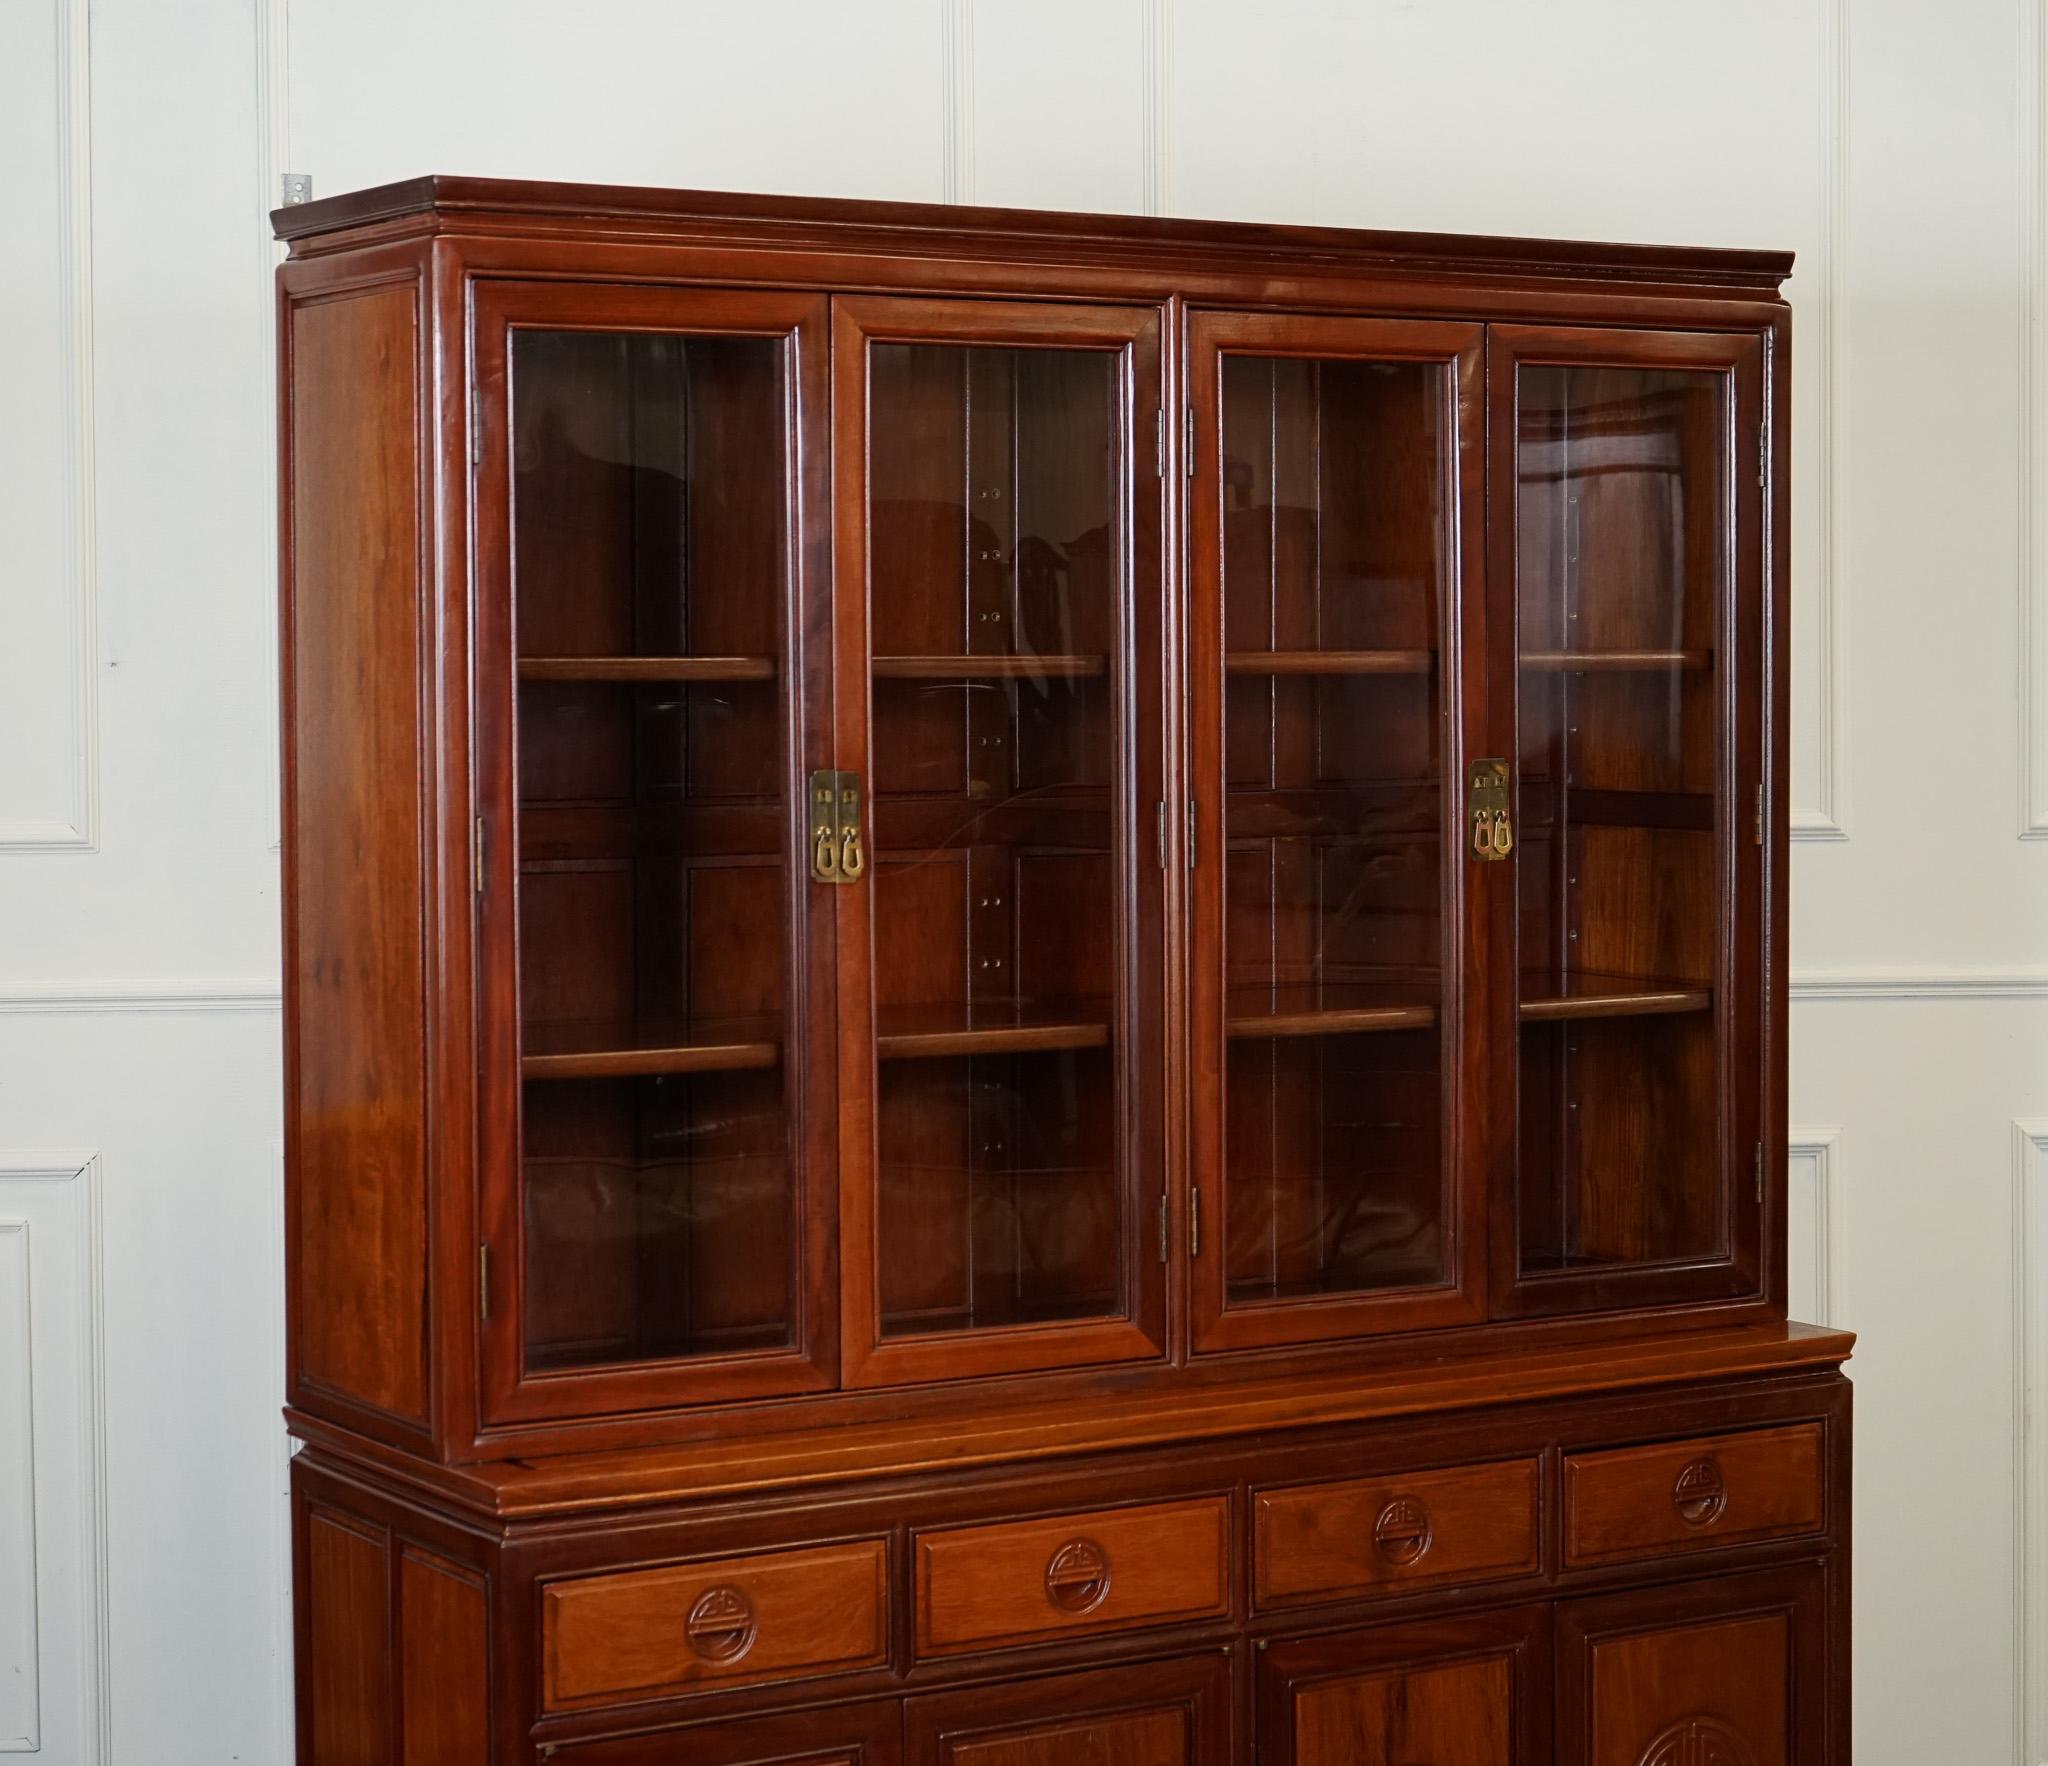 LARGE VINTAGE ORIENTAL CHiNESE CARVED SOLID HARWOOD BOOKCASE DISPLAY CABINET J1 In Good Condition For Sale In Pulborough, GB